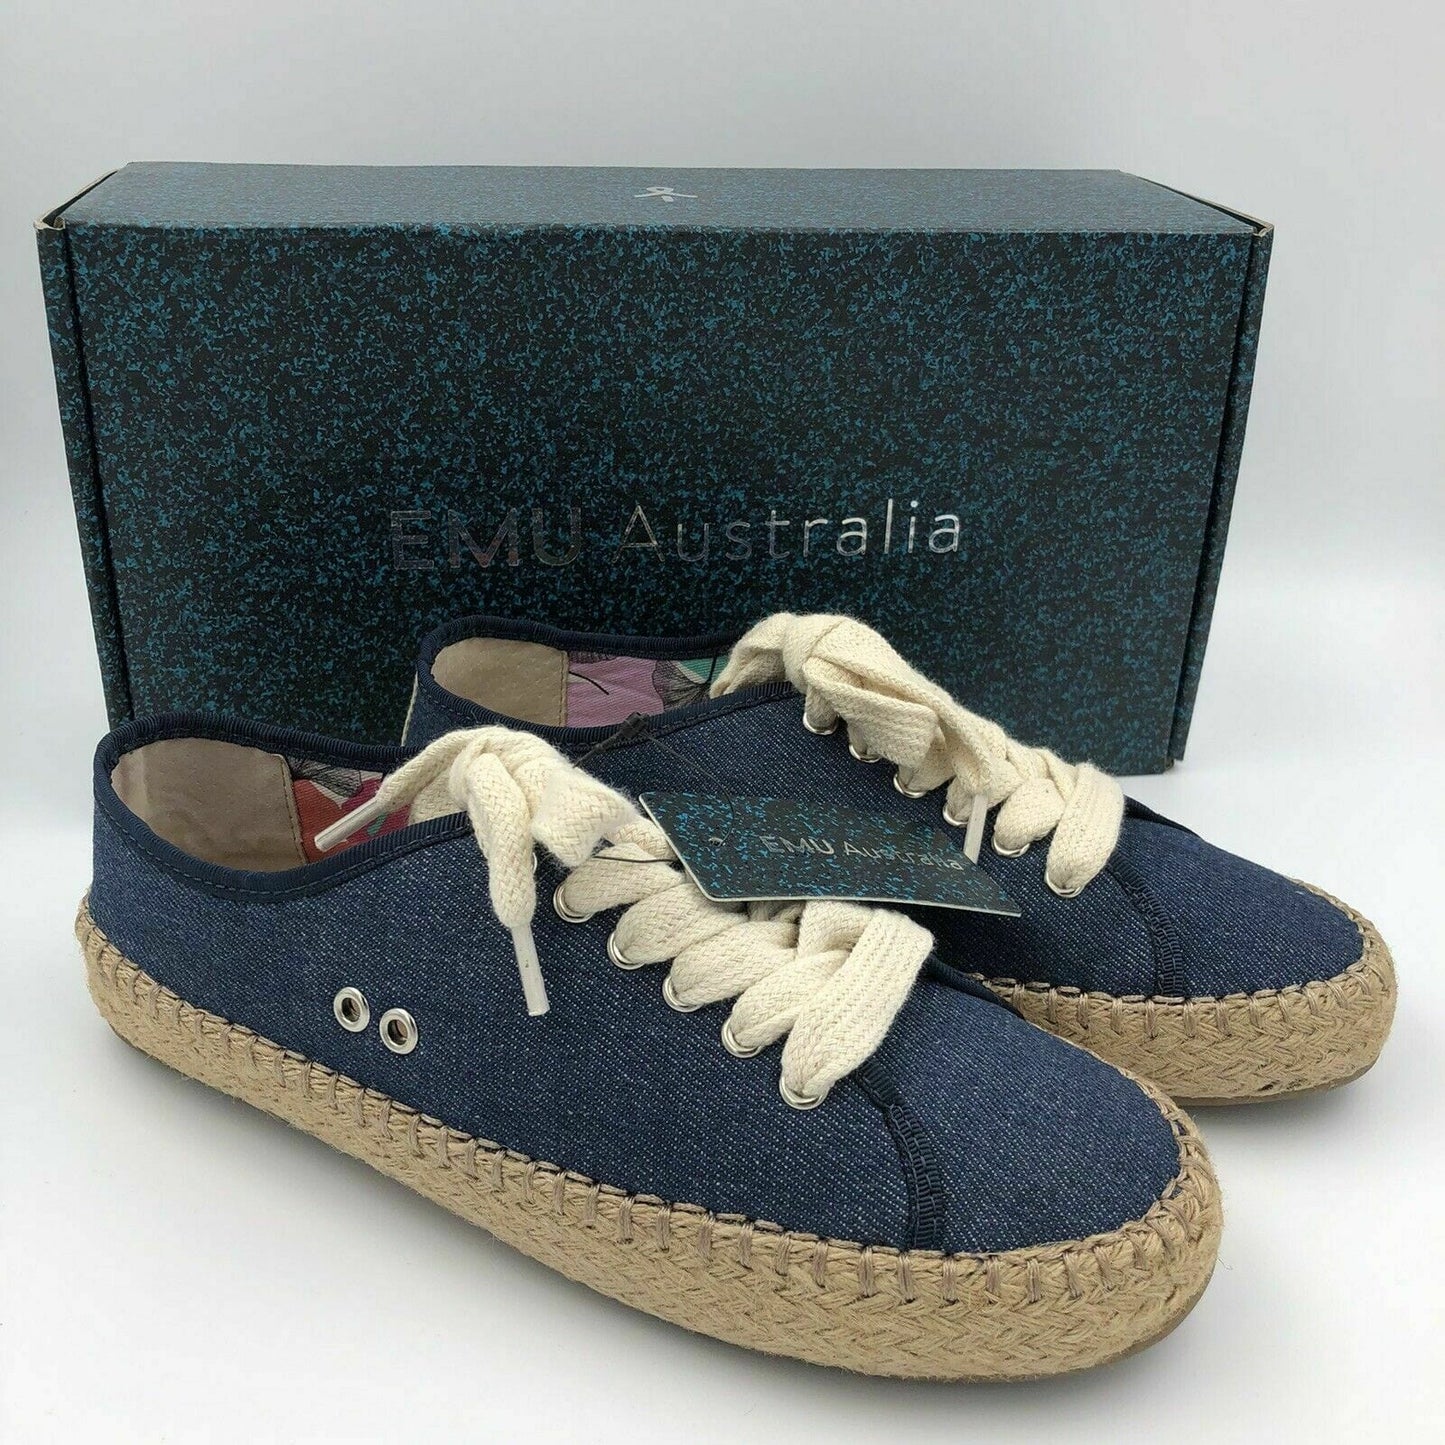 EMU Australia Womens Agonis Canvas Sneakers Shoes, Blue - Size 6